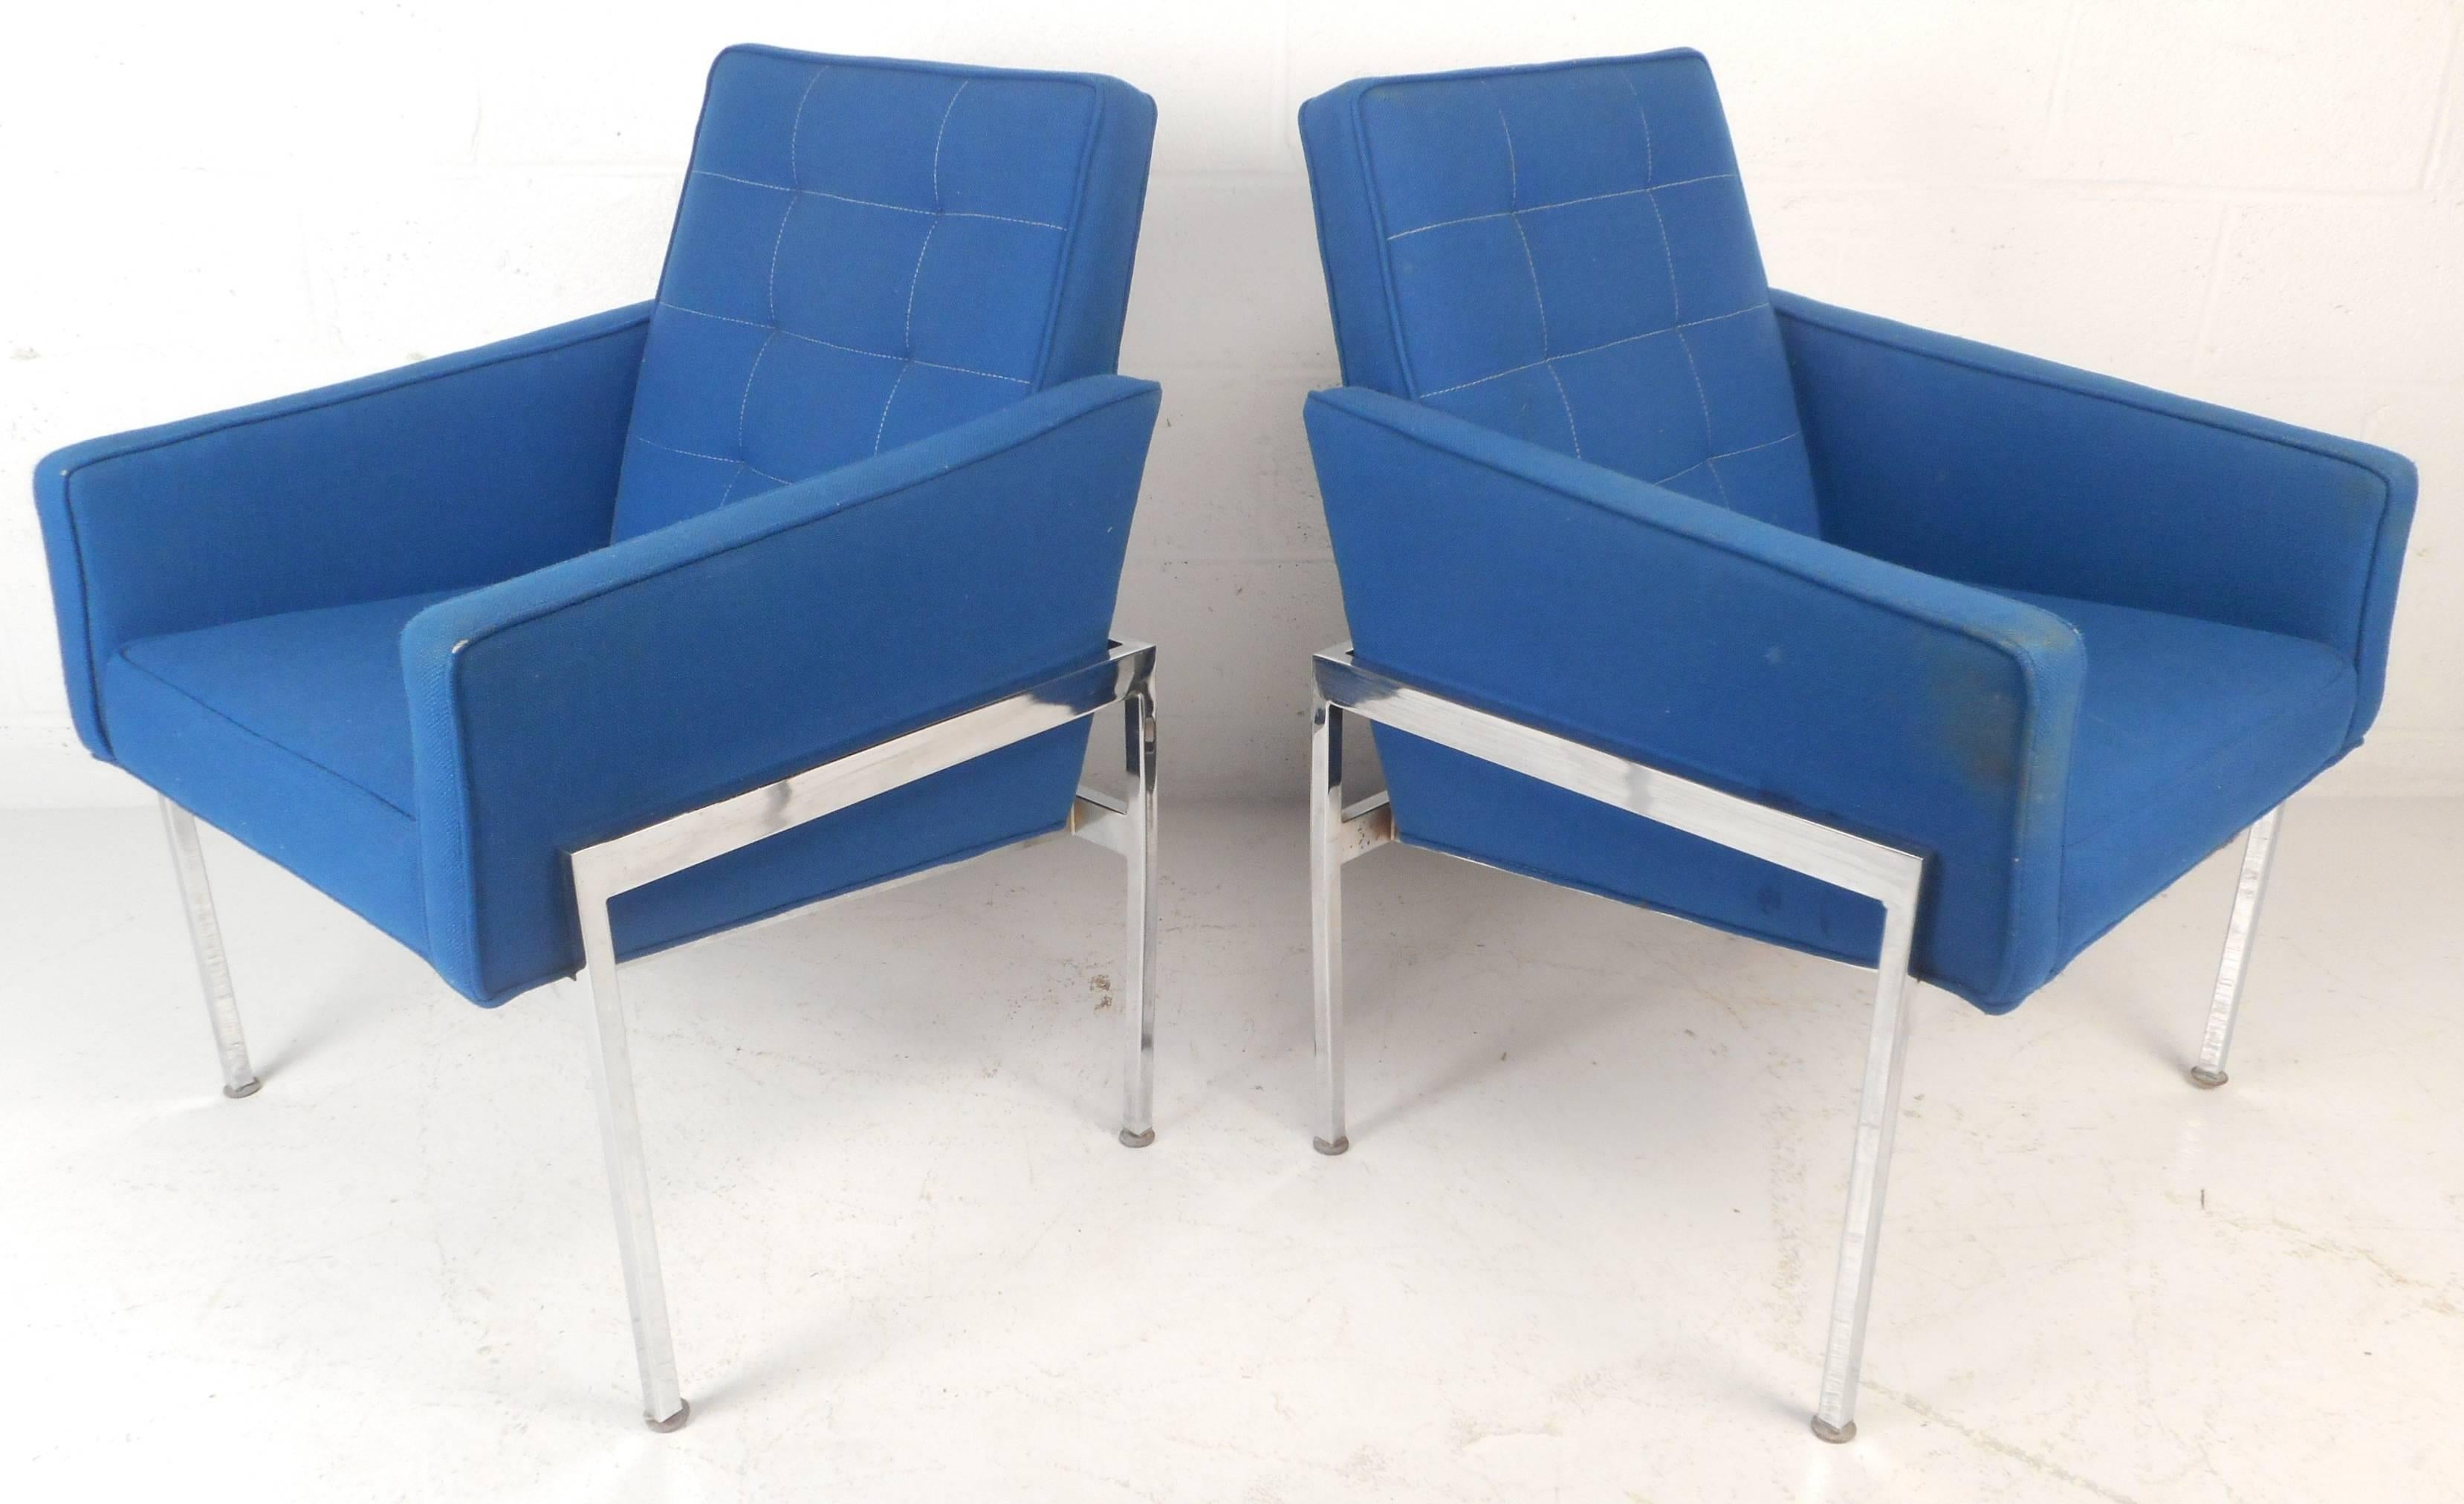 Pair of Mid-Century Modern Chrome Frame Tufted Lounge Chairs For Sale 1